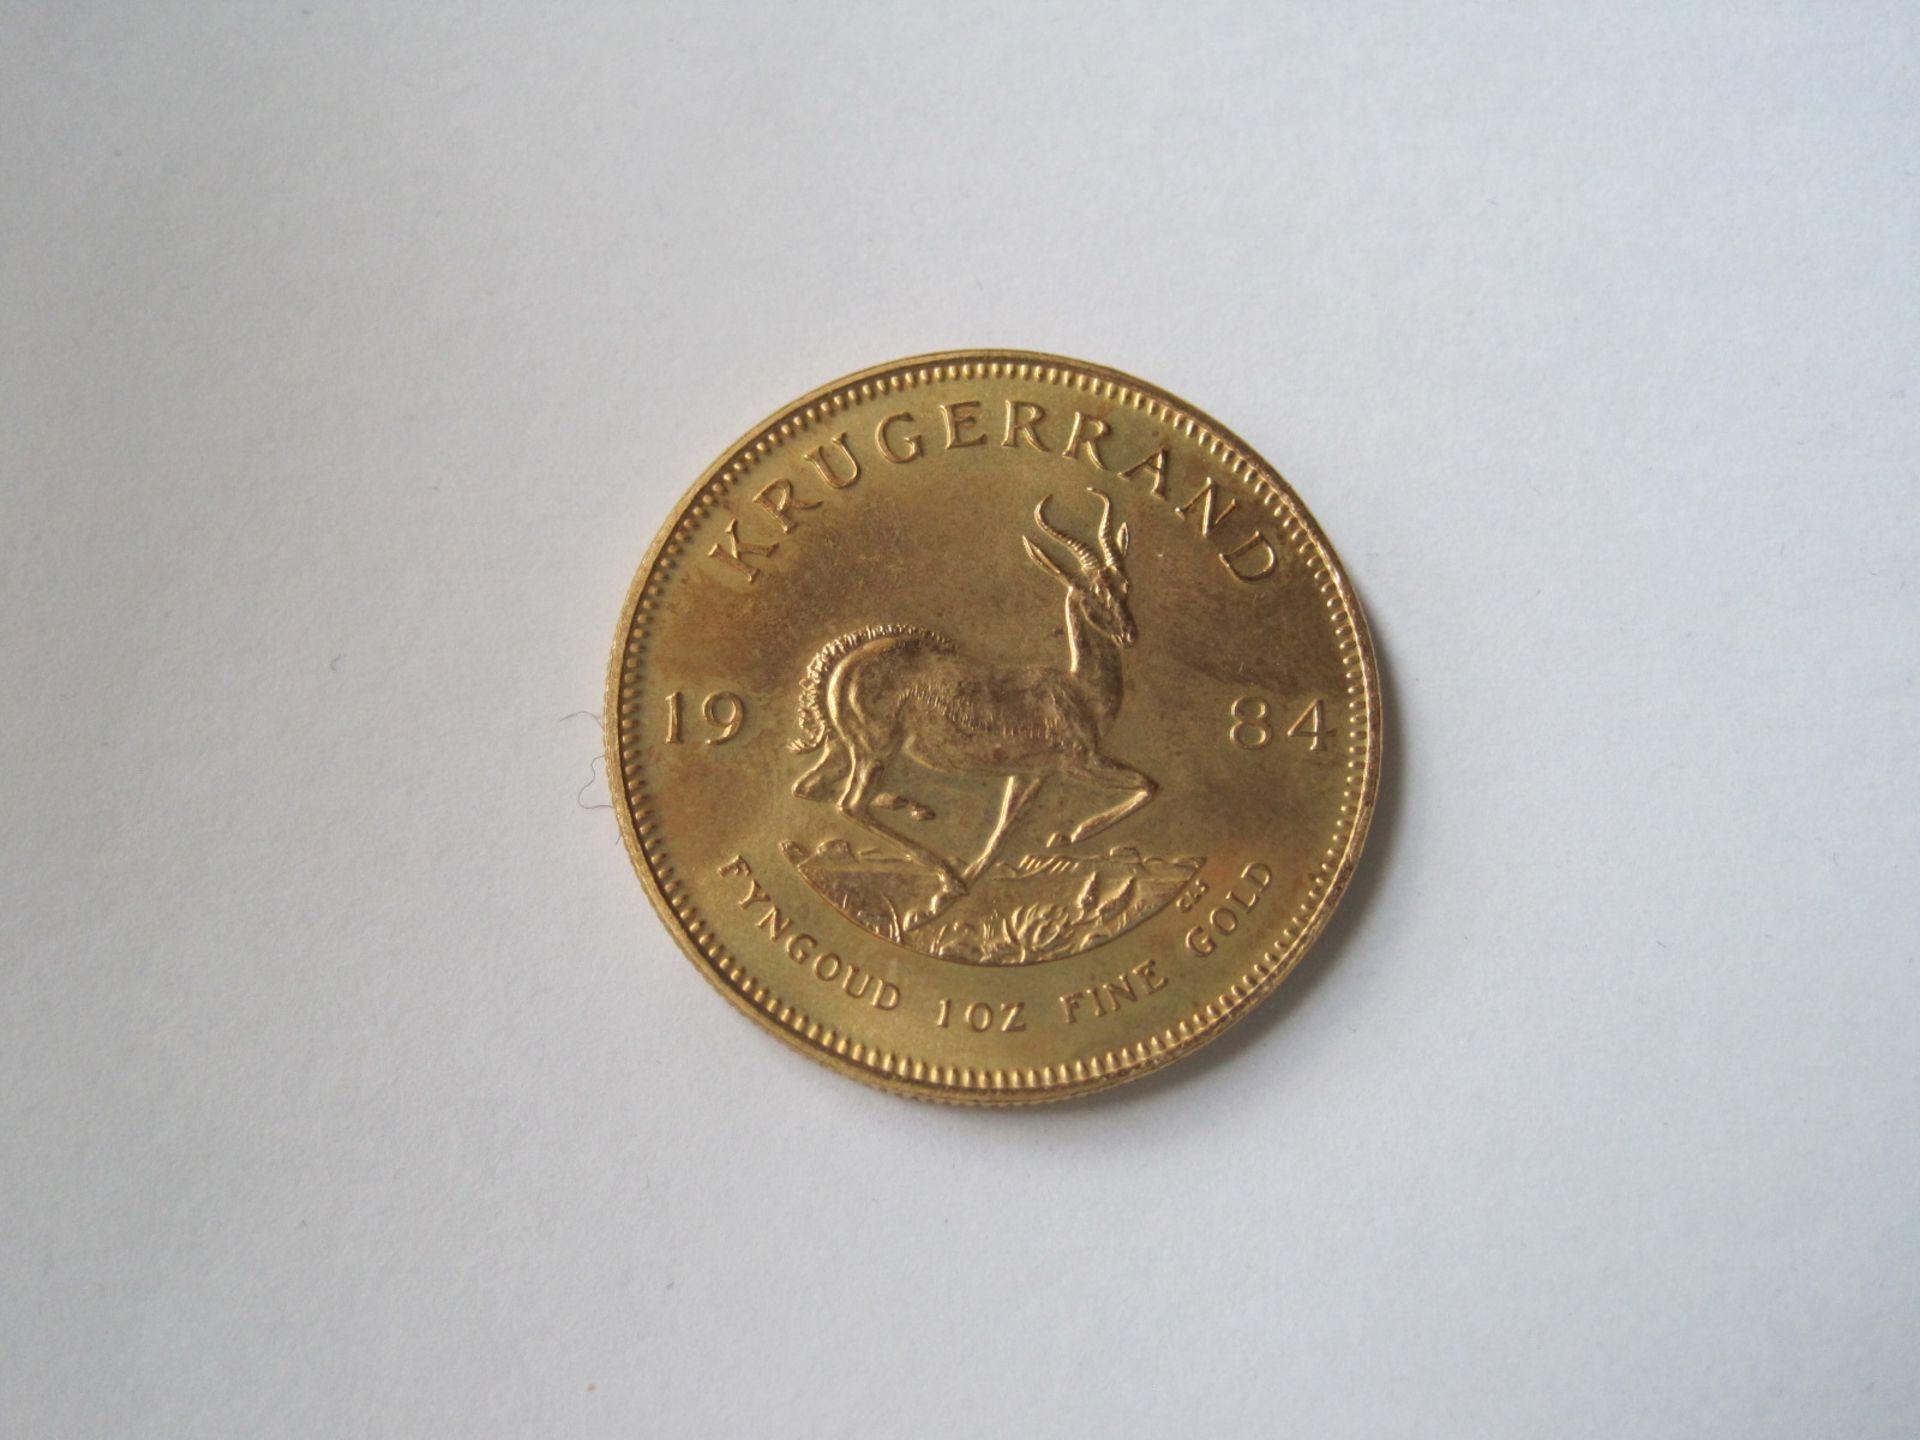 Krugerrand gold coin from South Africa, 1984 - Net weight: 33.93 g - - Pièce en or [...]